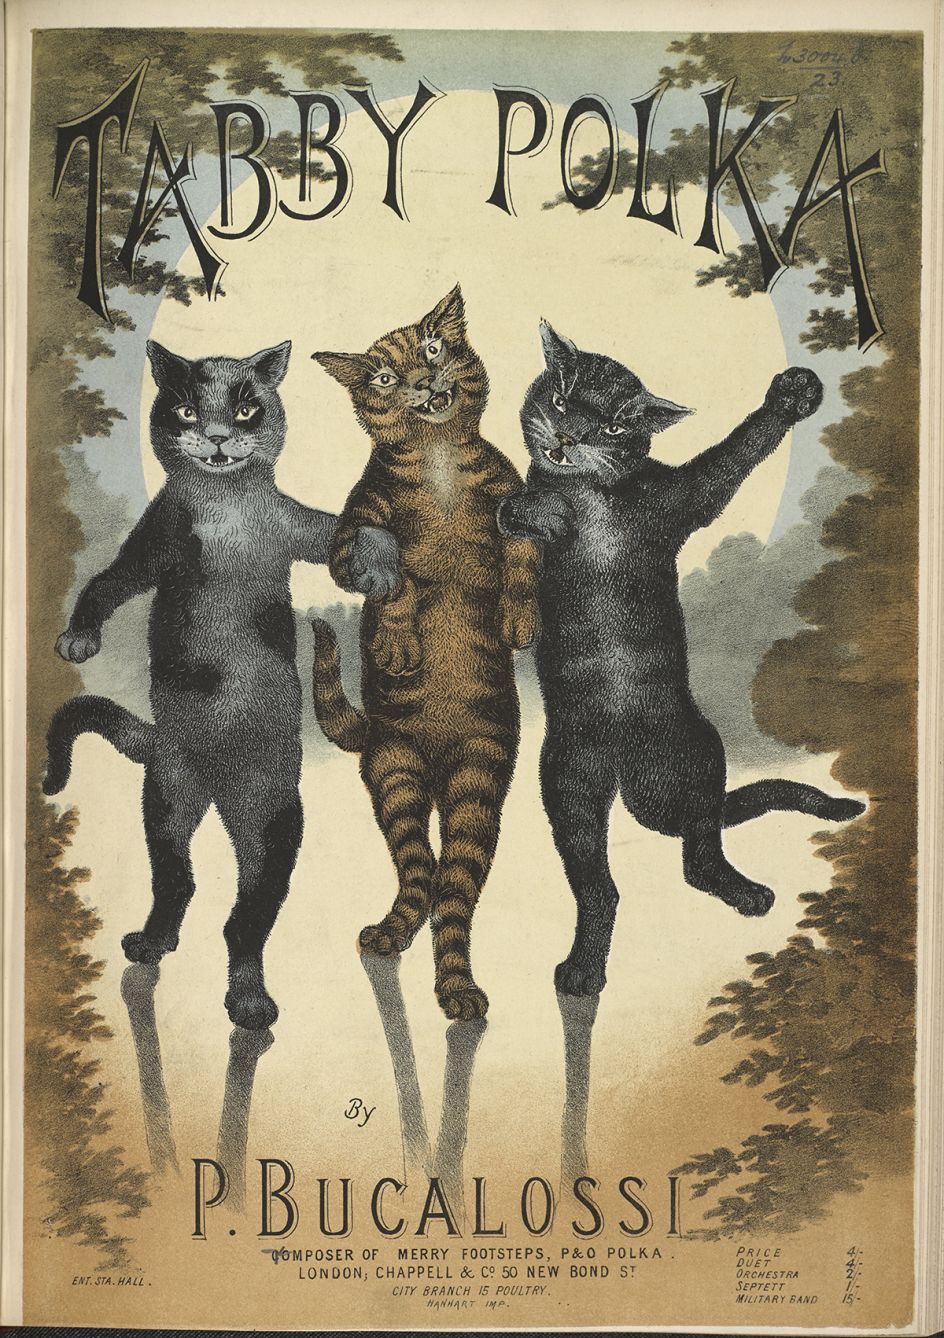 Tabby Polka by P- Bucalossi, 1865 (c) The British Library Board